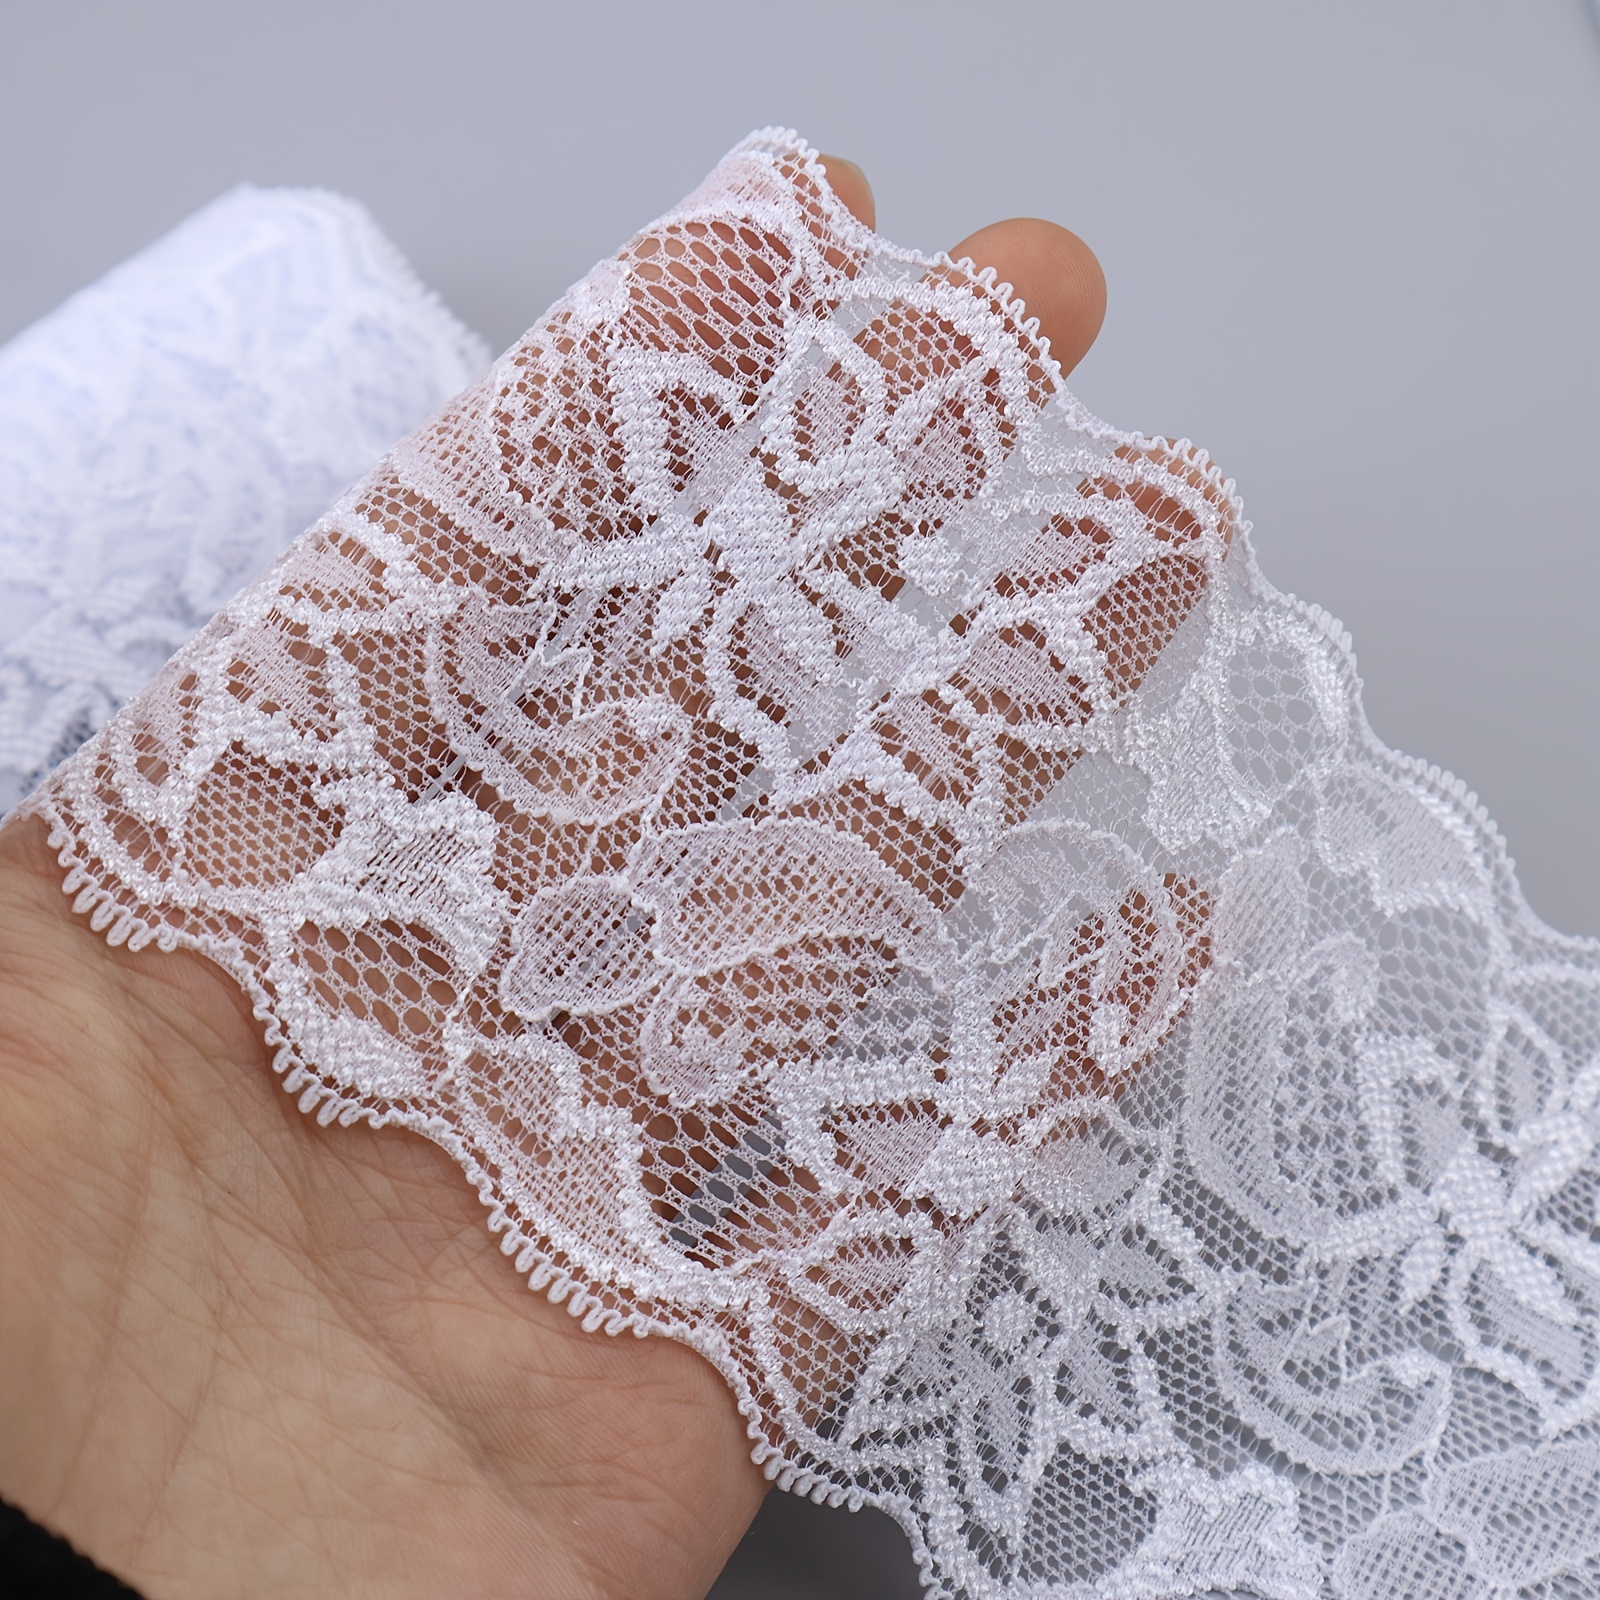 Olive Lace Black Stretch Lace Ribbon with Floral Pattern3 Inches Wide Lace Trim Ribbon for Bridal Wedding Decorations, Sewing and DIY Crafts- 5